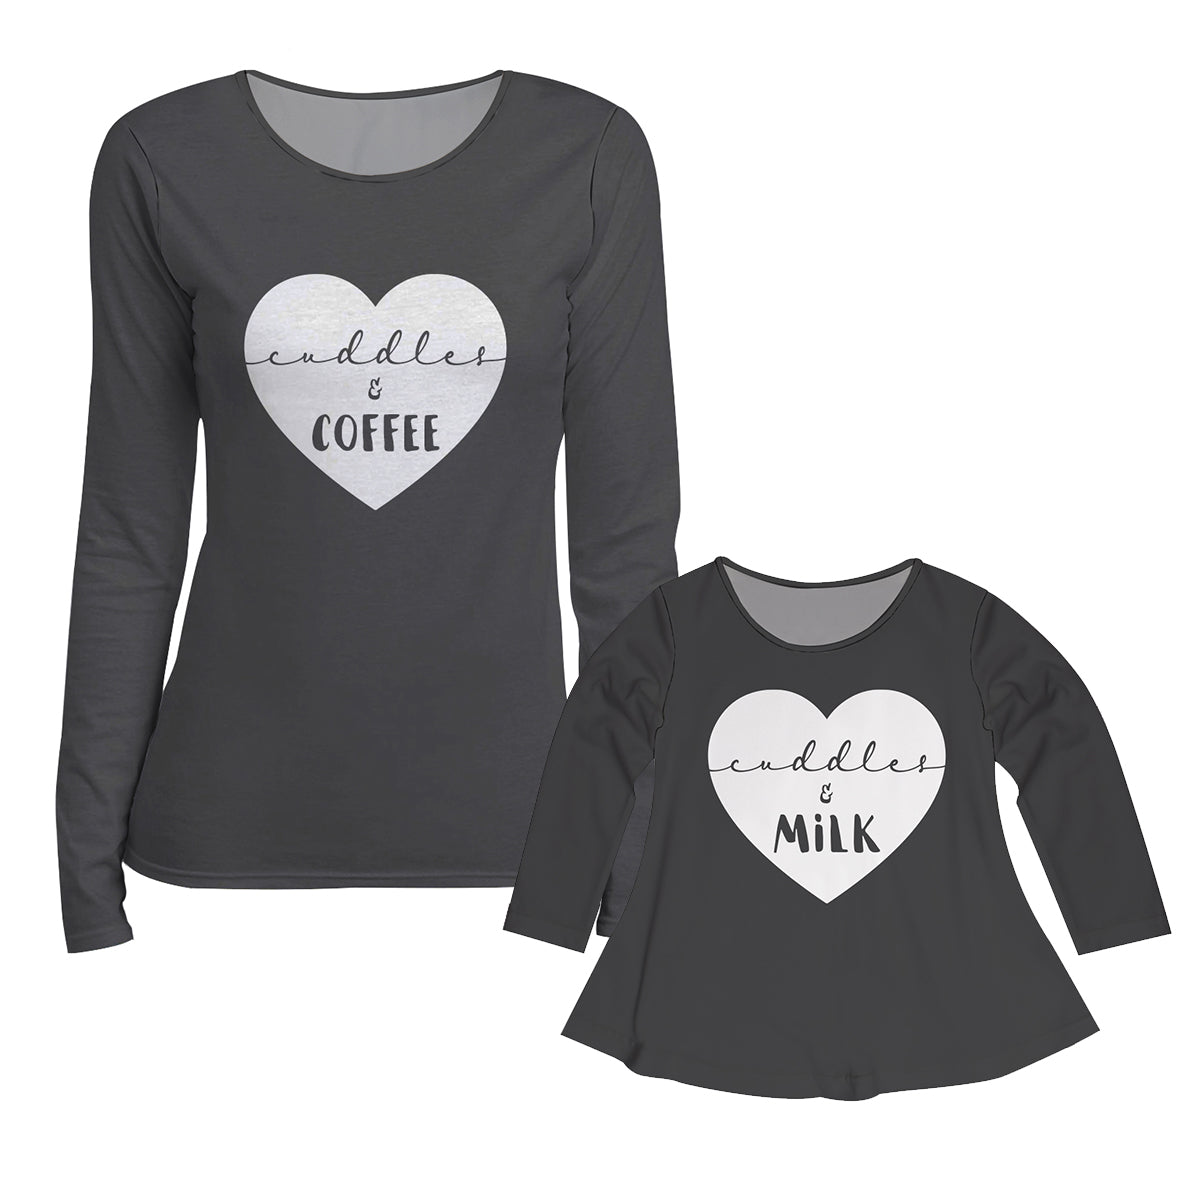 Cuddles and Milk Heart Gray Long Sleeve Laurie Top - Wimziy&Co.